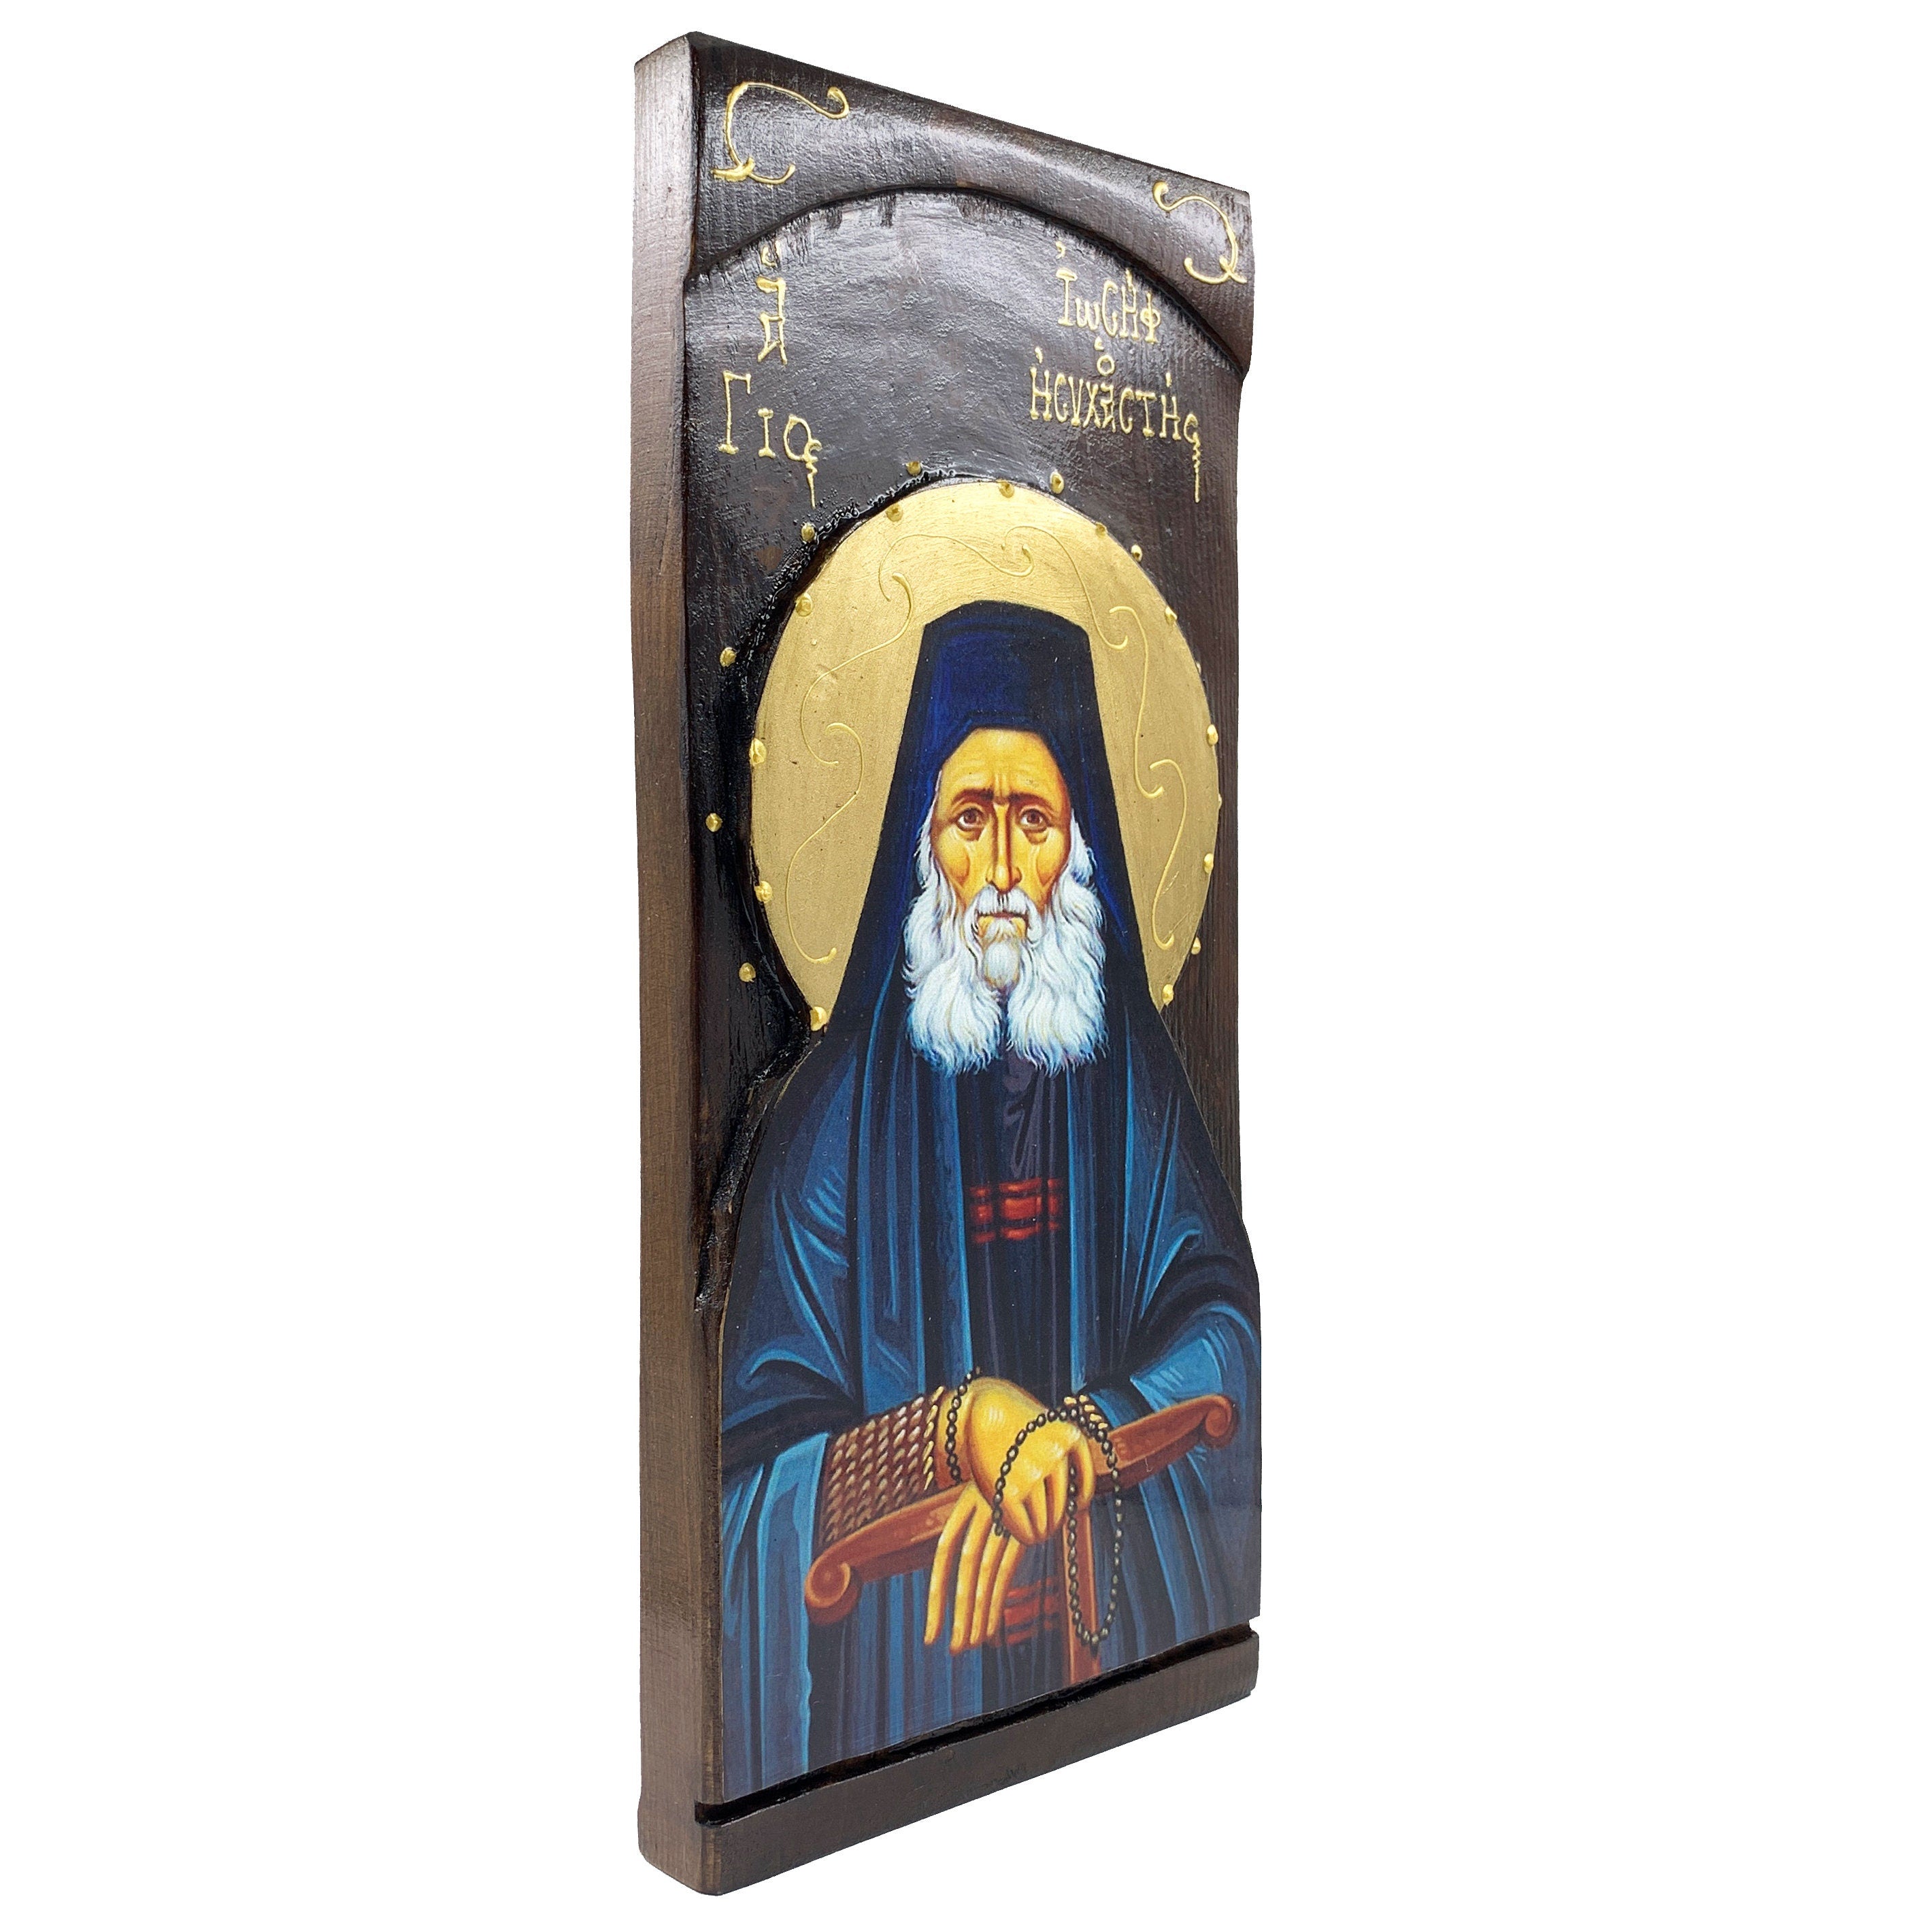 St Joseph the Hesychast - Wood curved Orthodox Icon - Handcrafted